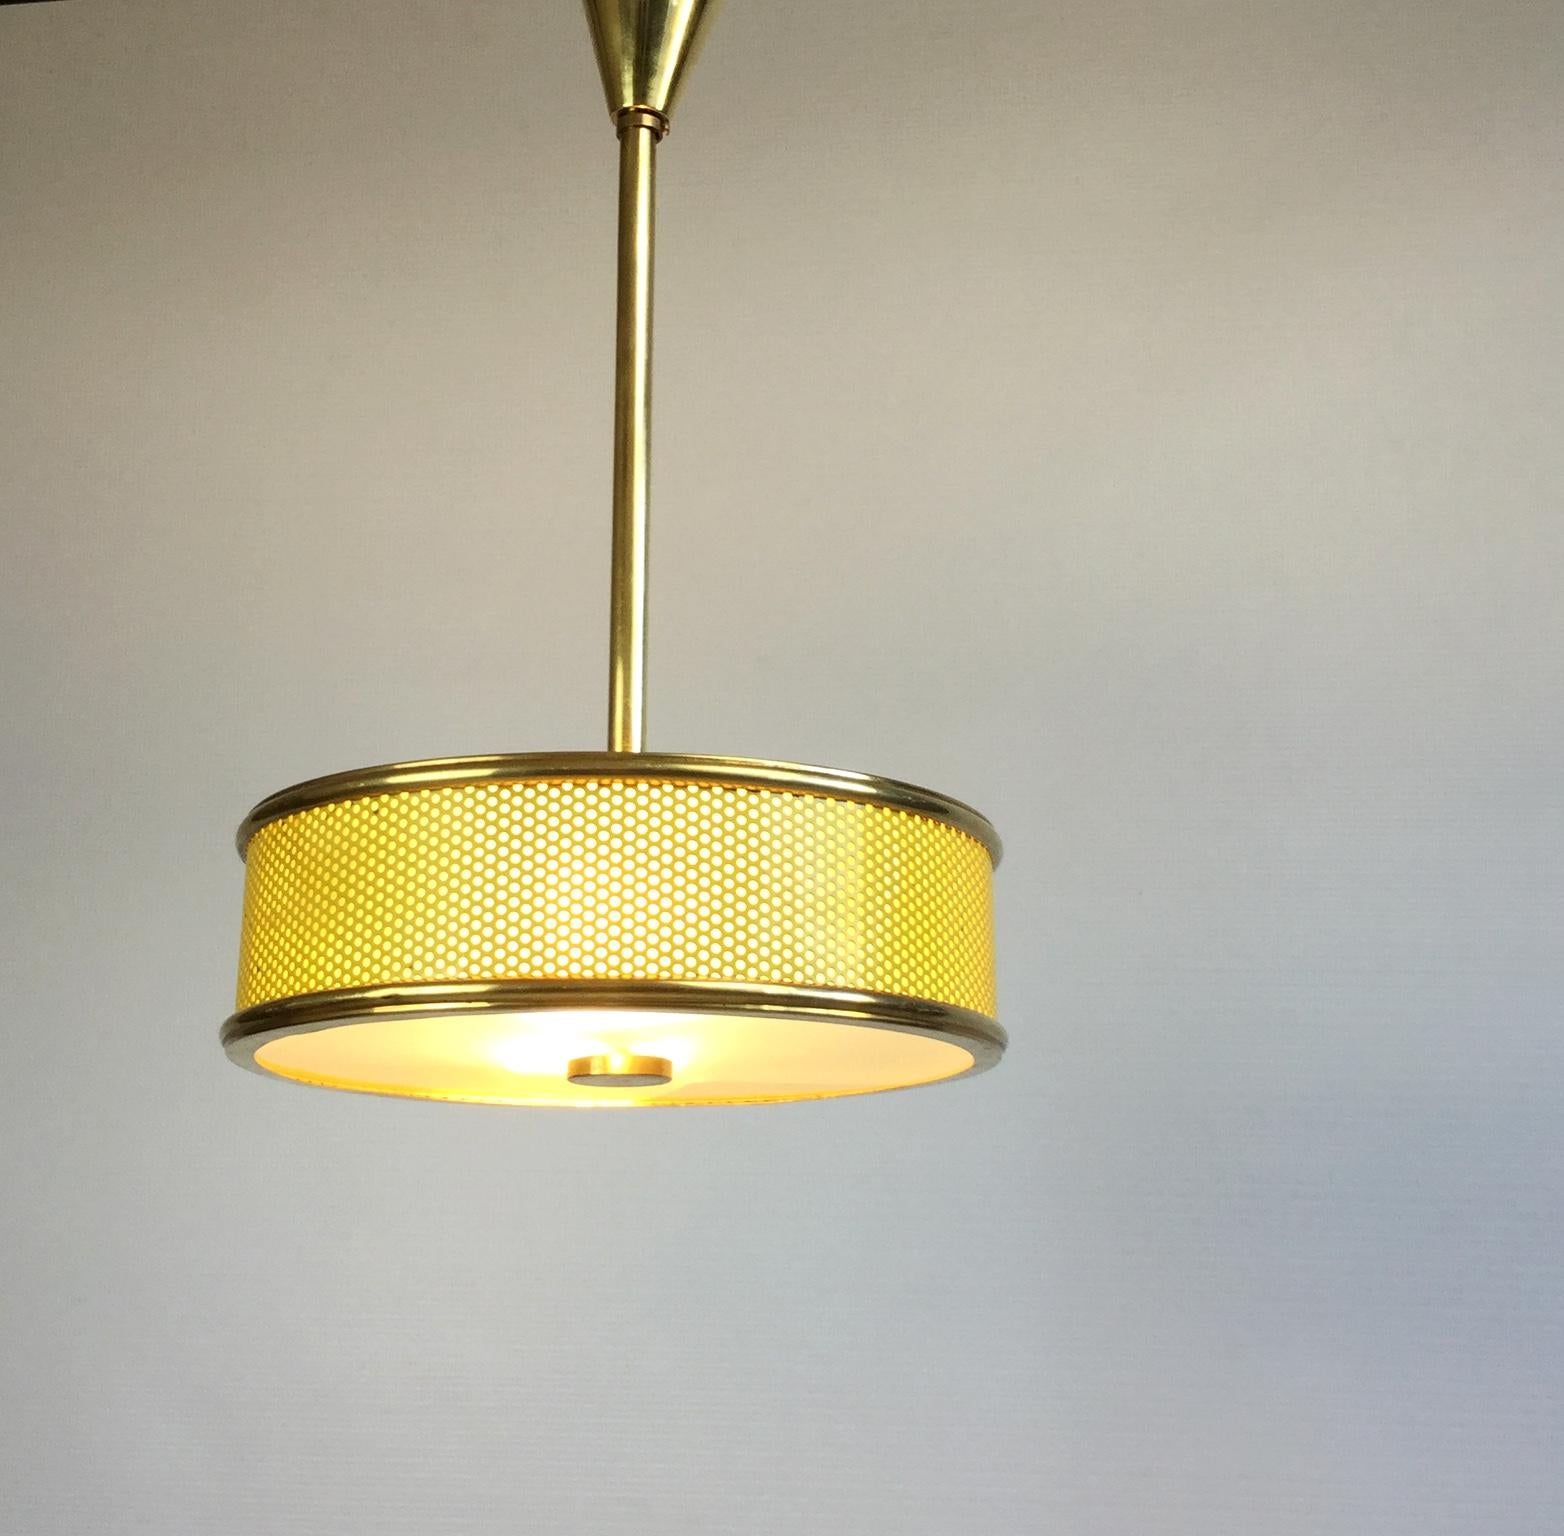 French Yellow Maison Arlus Ceiling Light Attributed to Pierre Guariche France 1950s